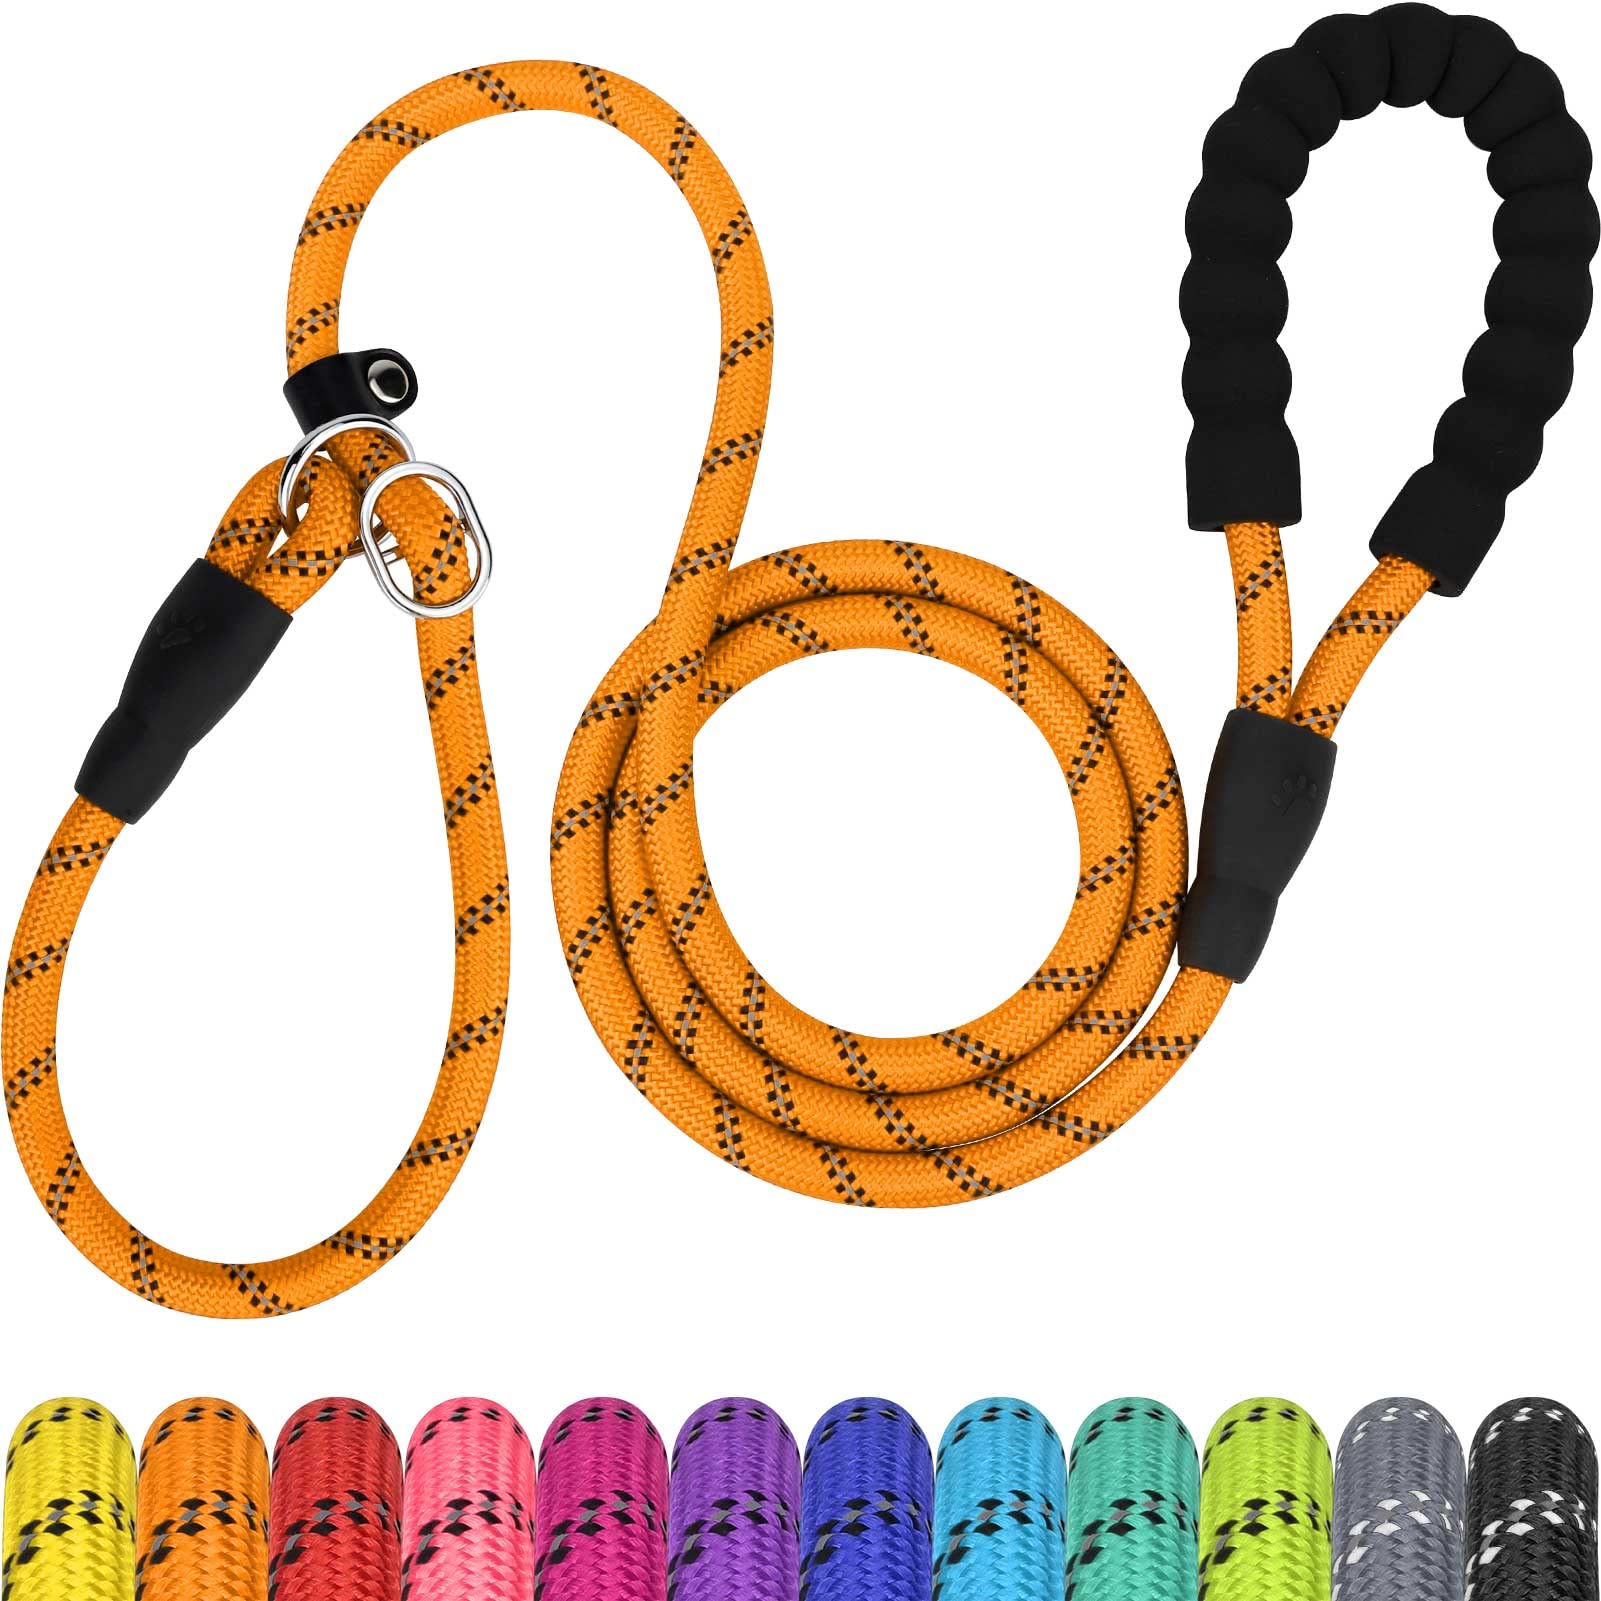 Tagme 6 Ft Slip Lead Dog Leash,12 Colors,Reflective Strong Rope Slip Leash With Padded Handle,Durable No Pulling Pet Training Le